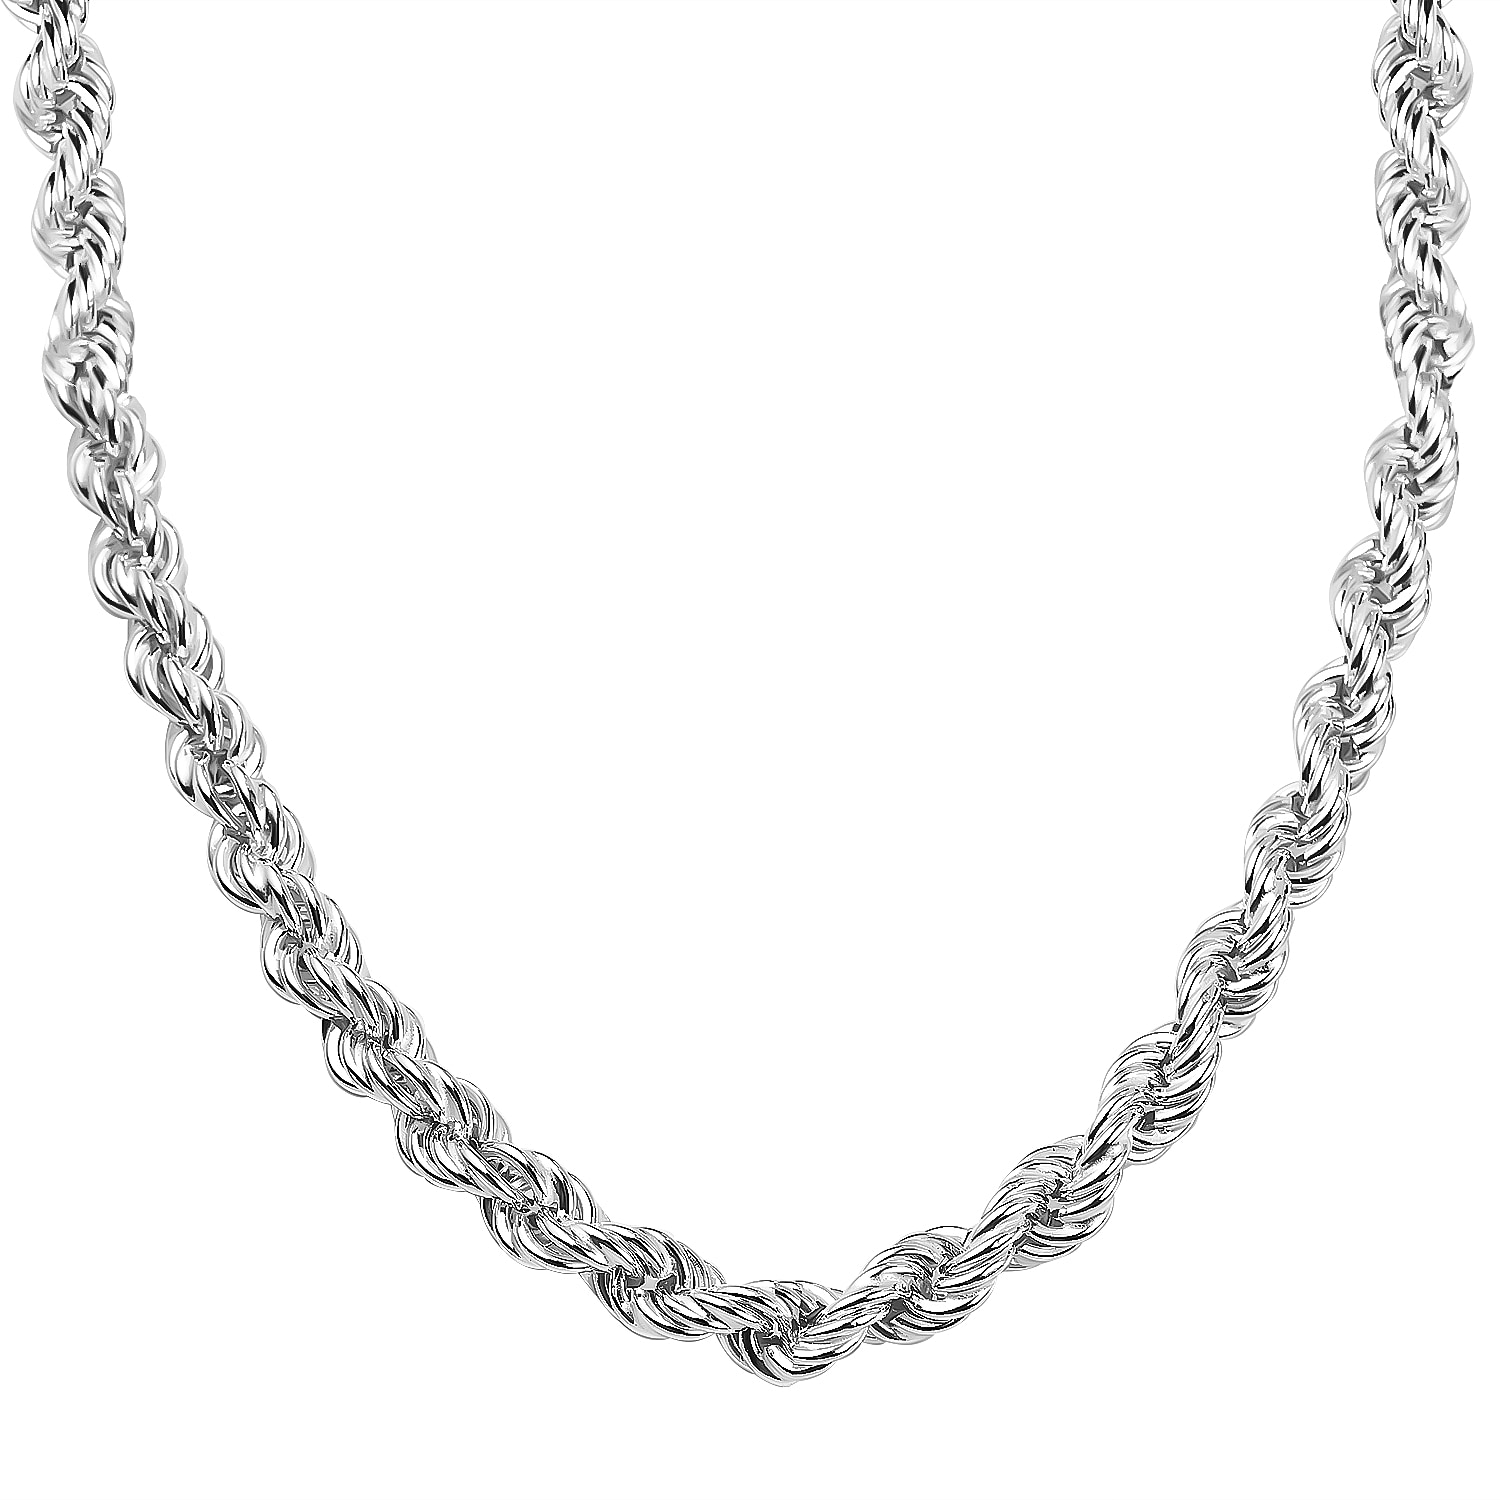 La Bella Italian Close Out   - Sterling Silver Rope Necklace (Size - 20), Silver Wt. 22.5 Gms